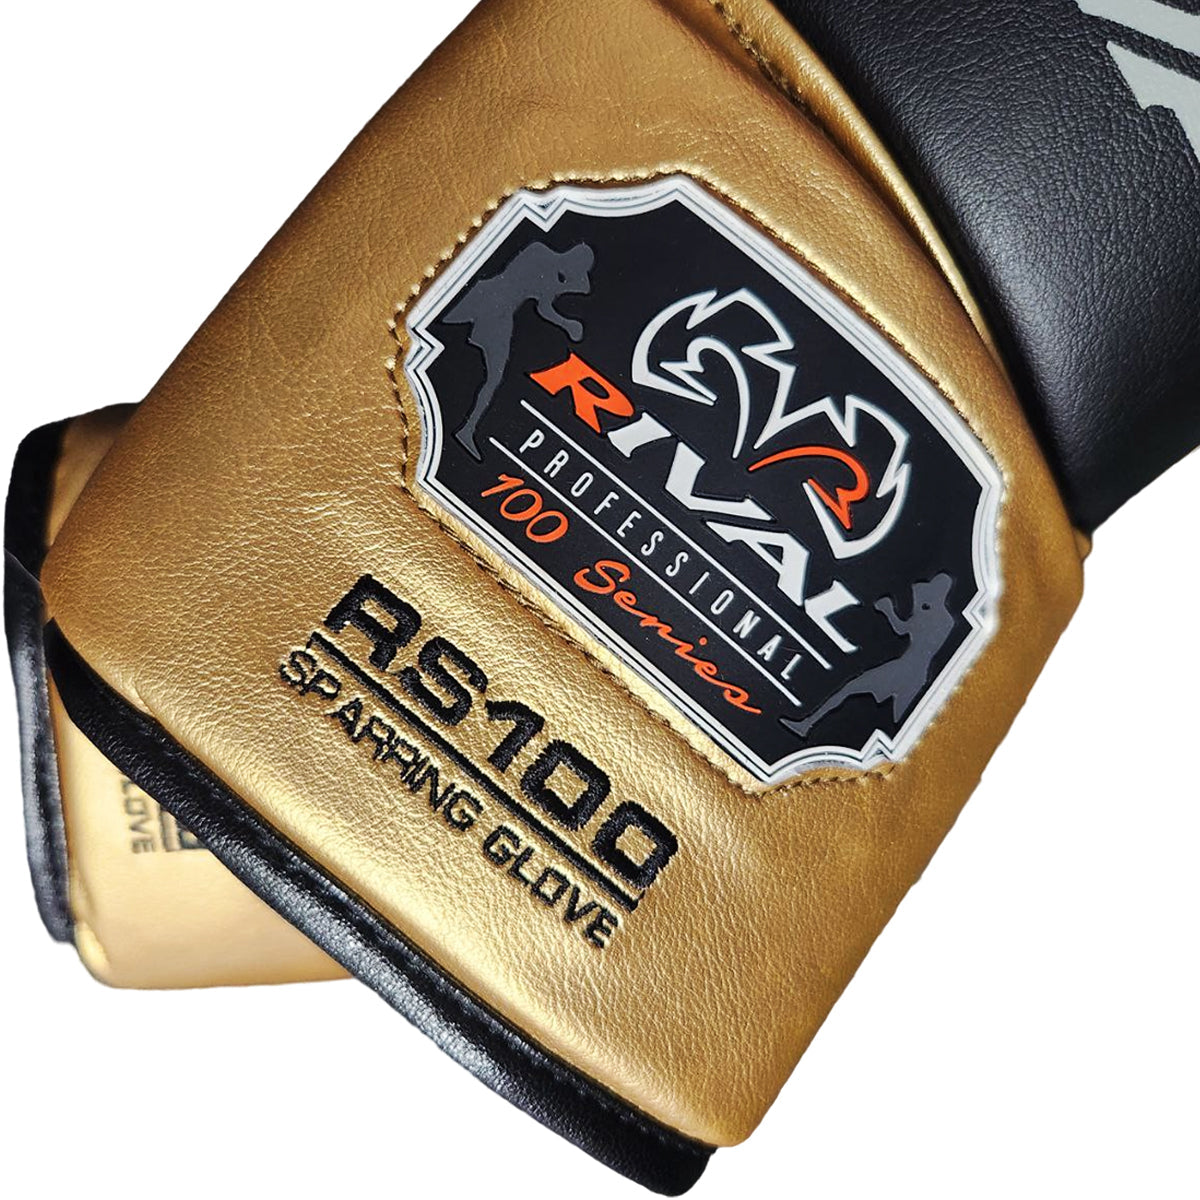 Boxing Gloves Rival RS100 Lace-up Professional Sparring Black-Gold